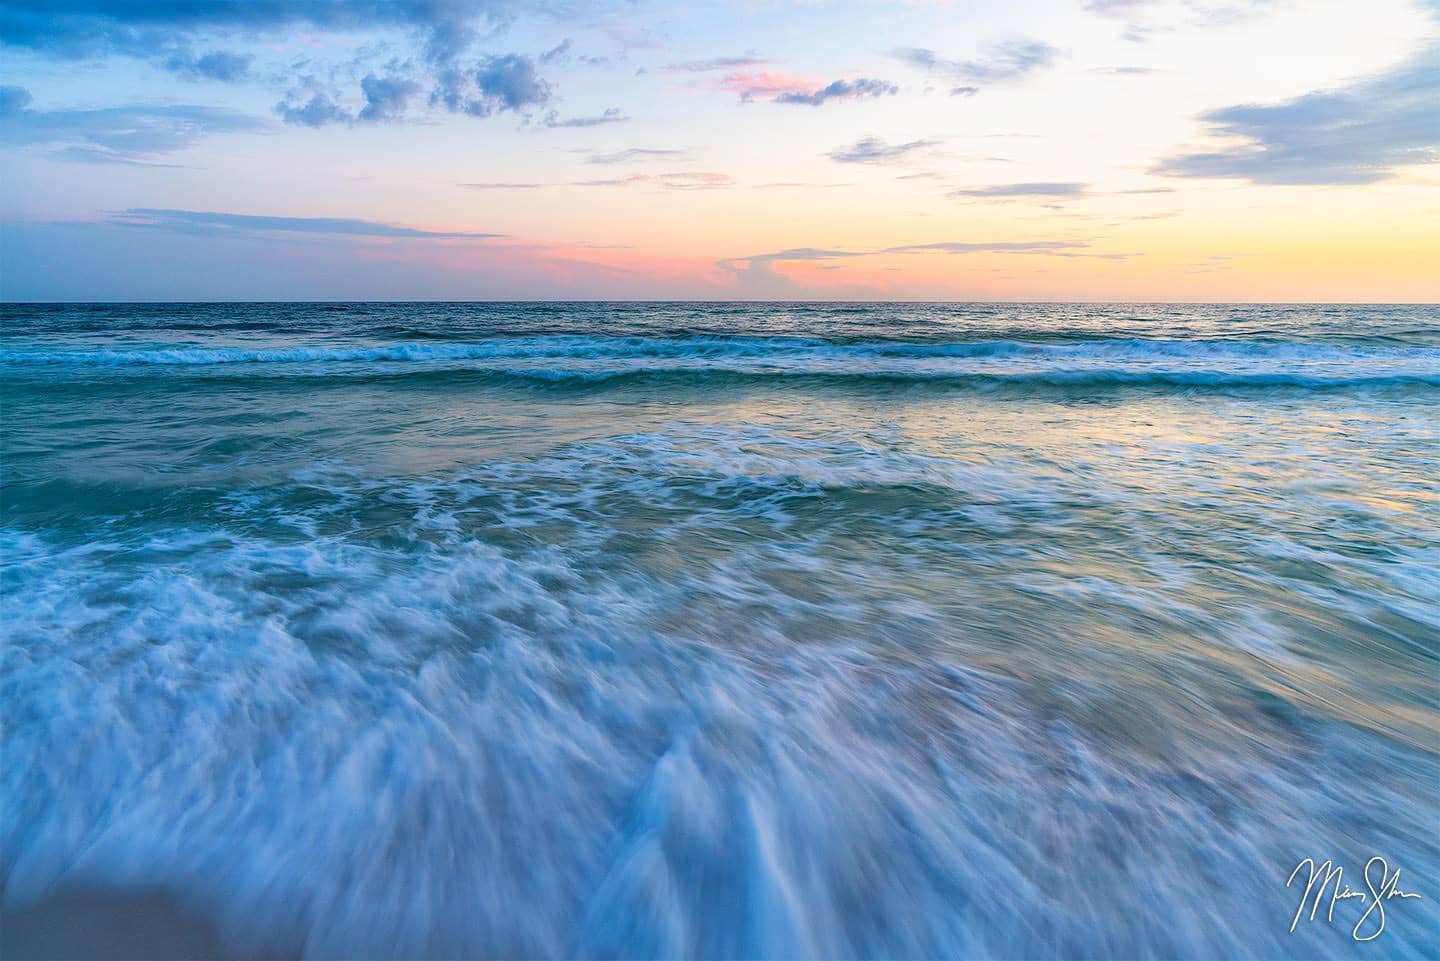 Clear water rushes the white sand beach at Destin as a pastel sunset lights up in the sky